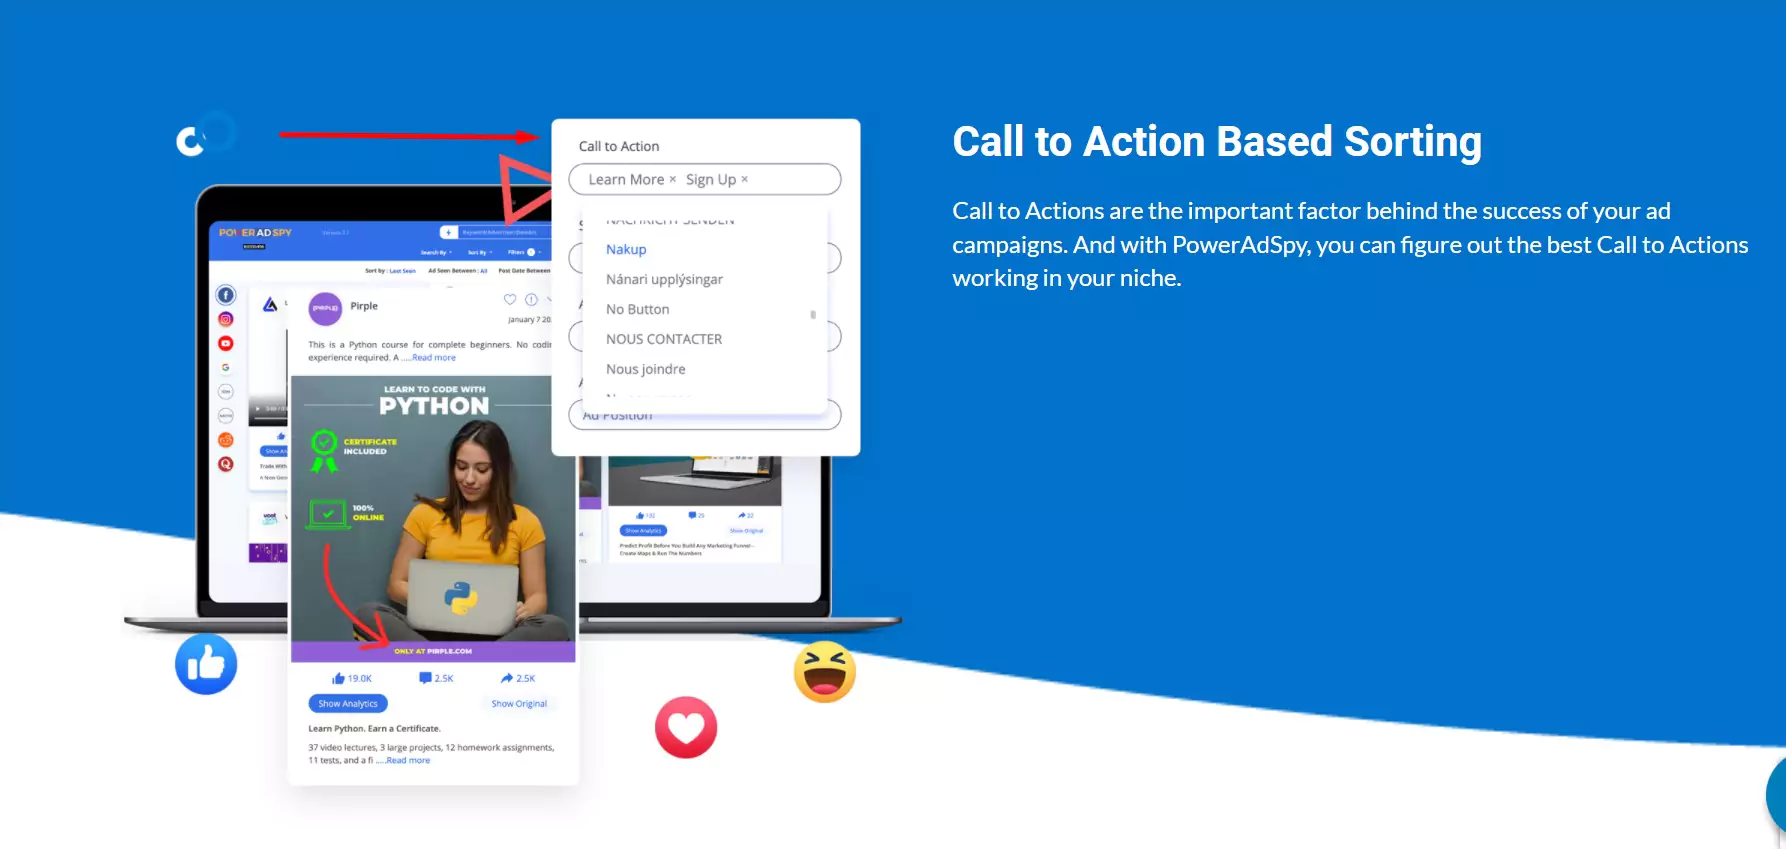 call-to-action-based-sorting